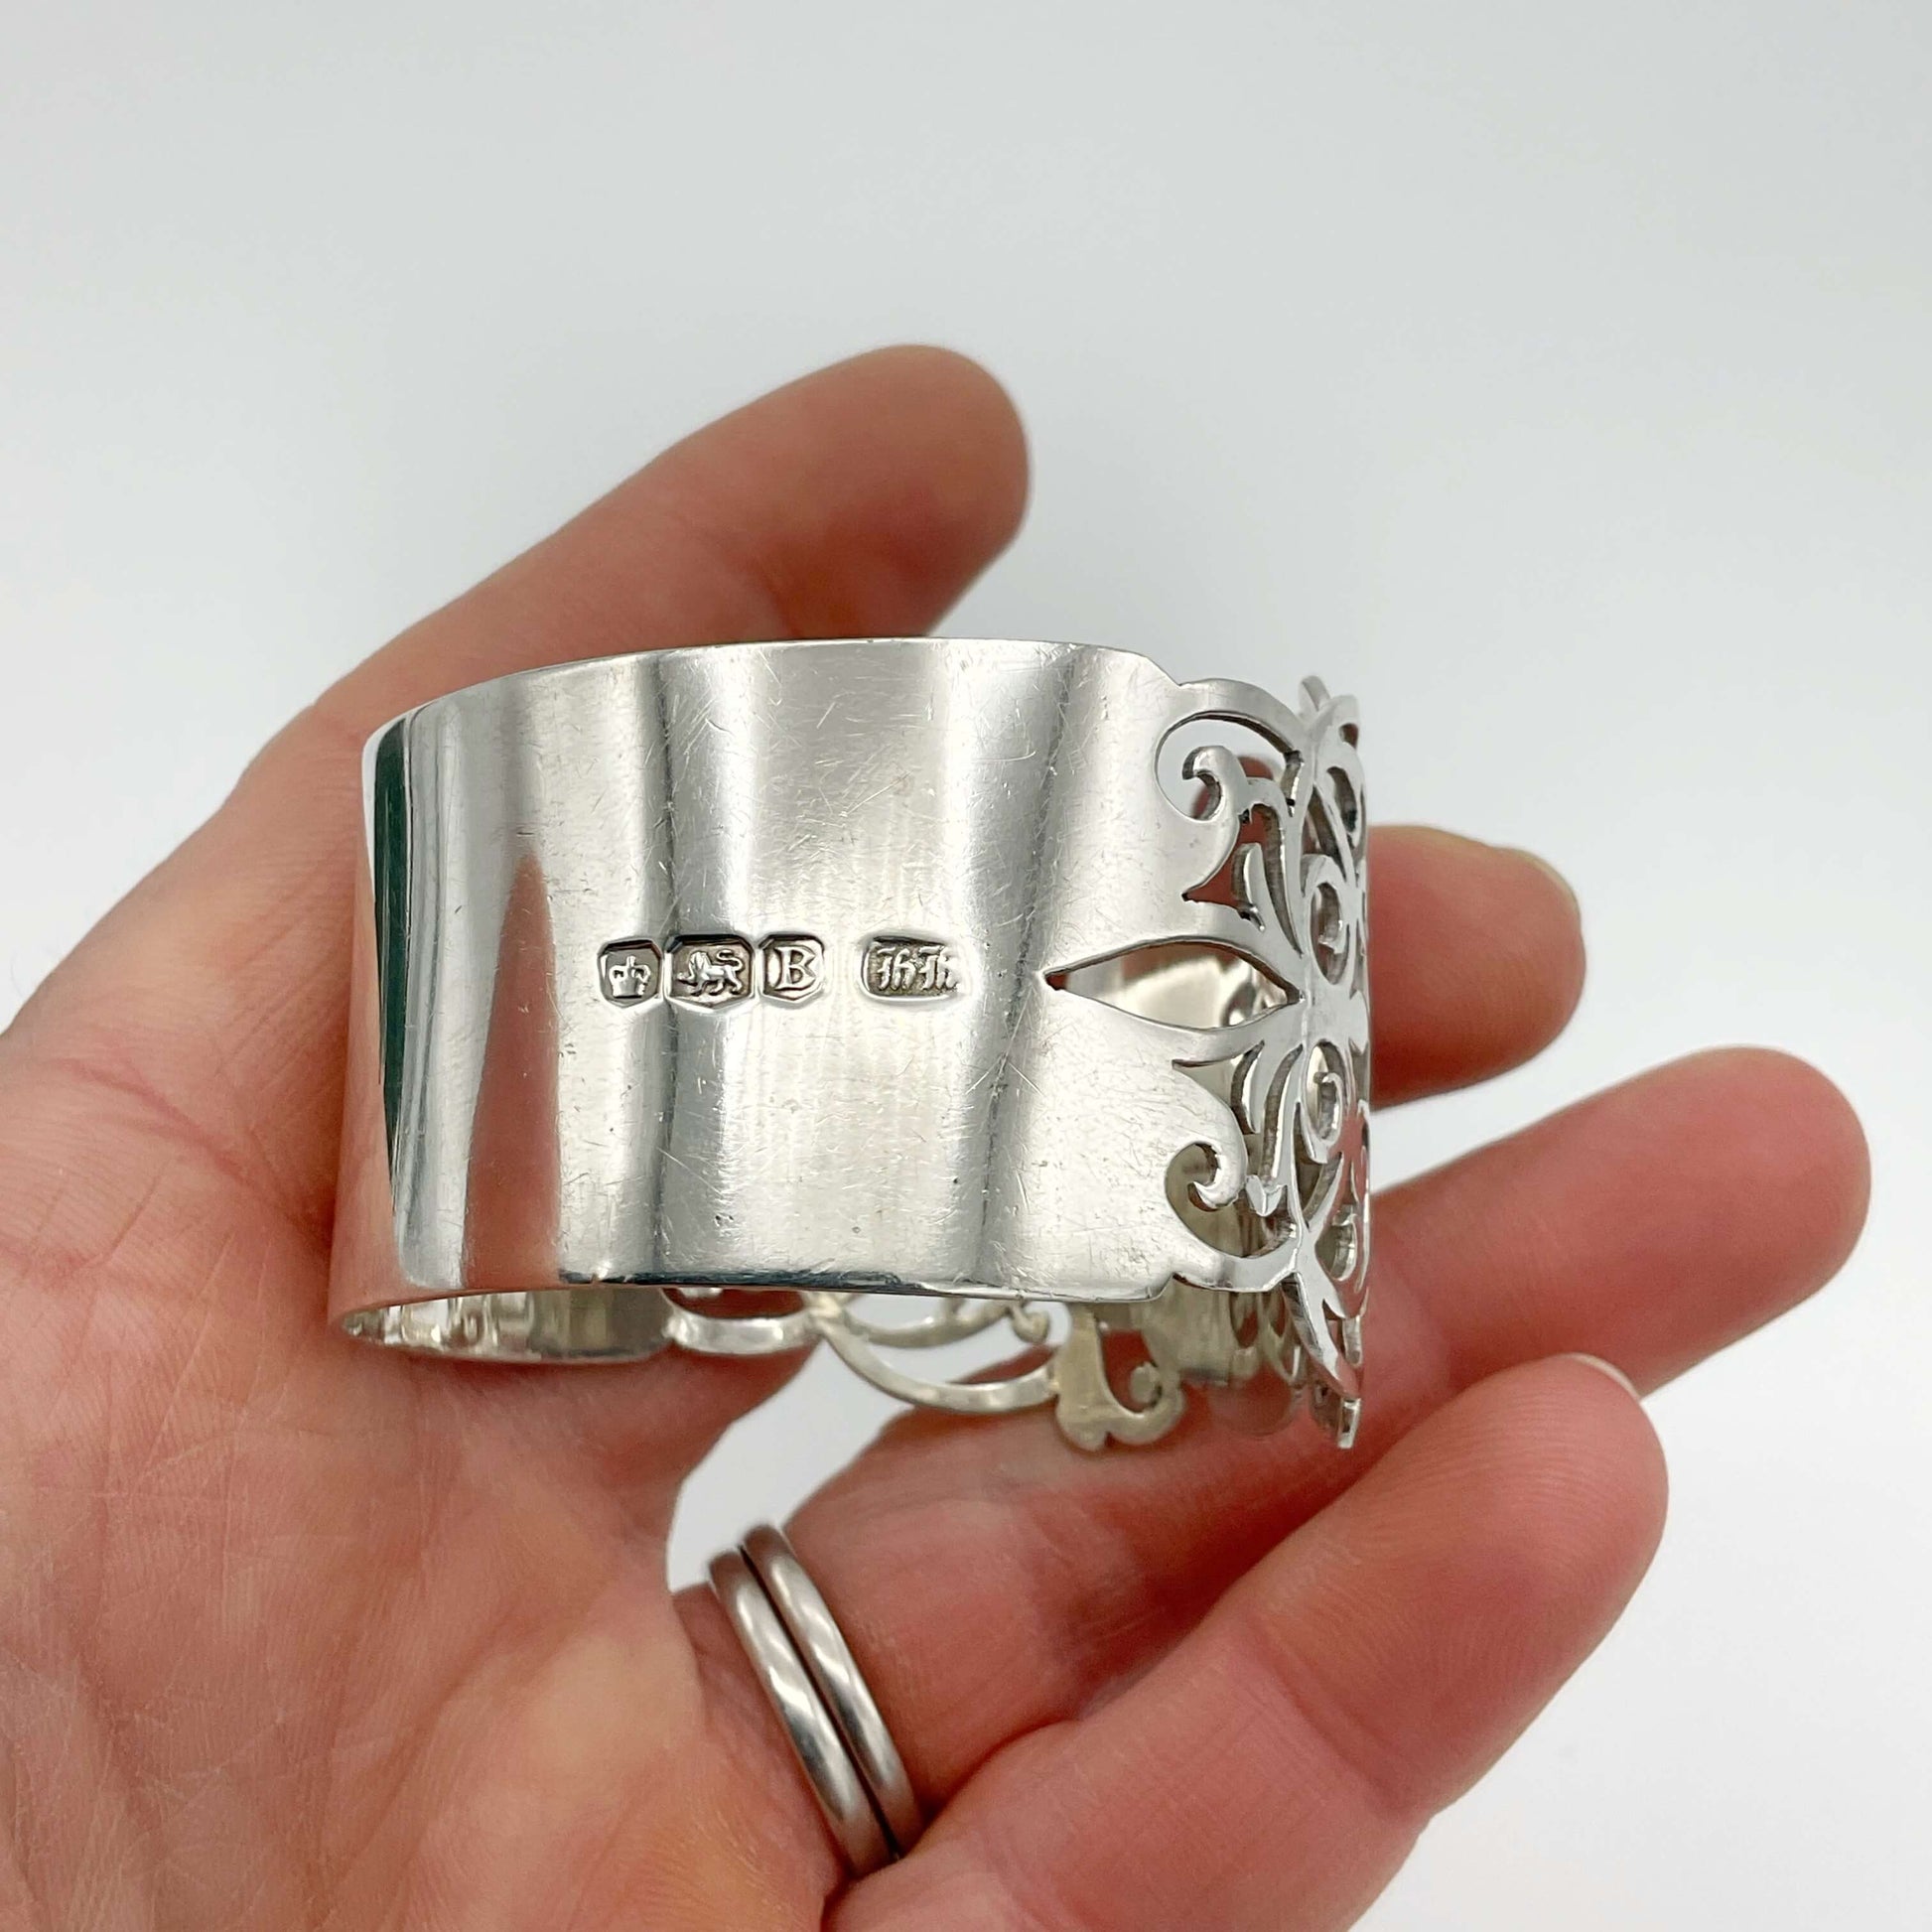 Shiny napkin ring with elaborate sides and hallmarks in a hand on a plain background 